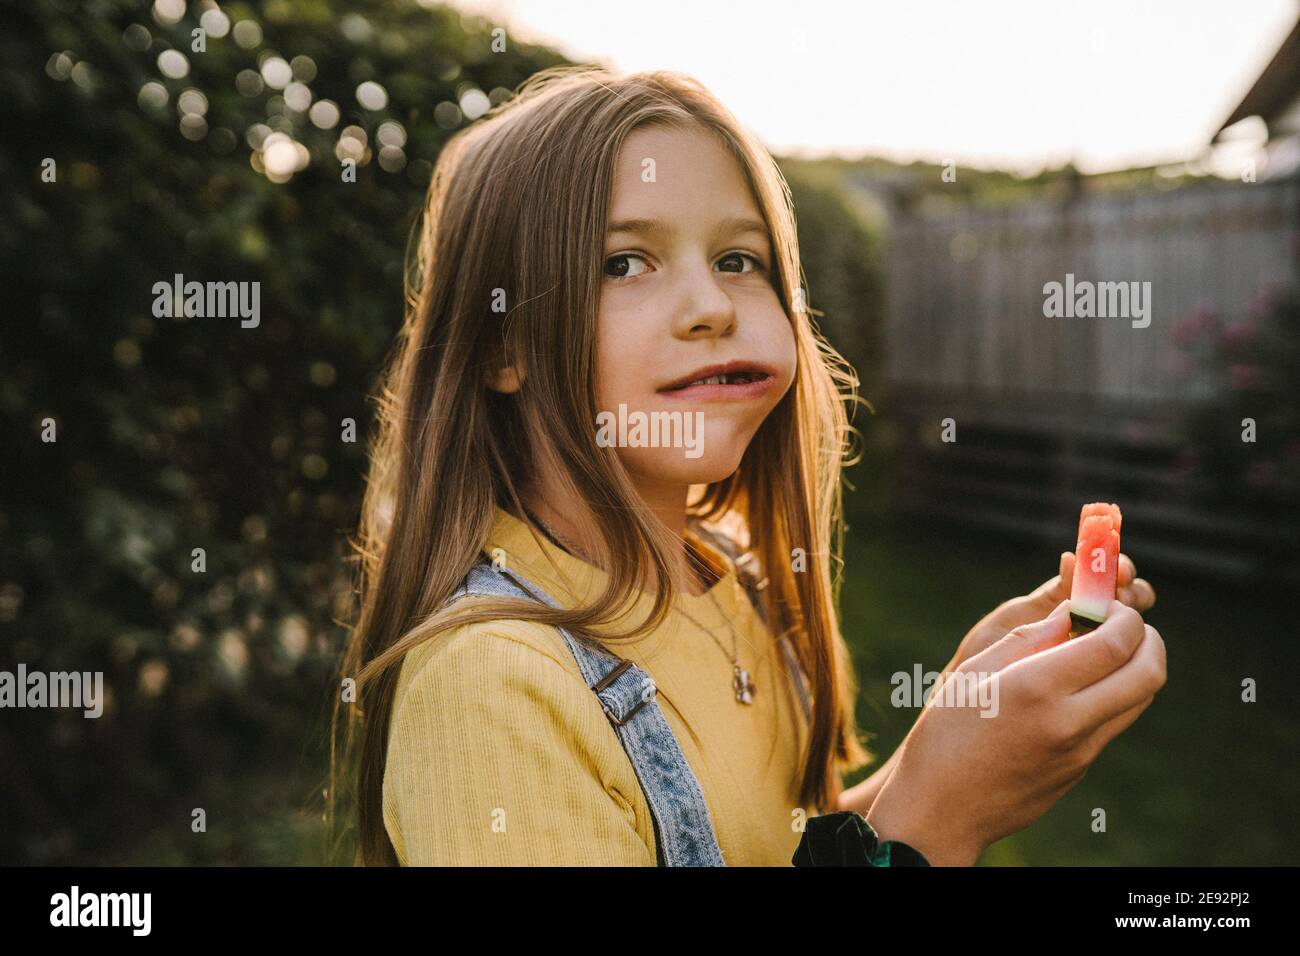 Pre-adolescent girl looking away while eating watermelon in back yard Stock Photo